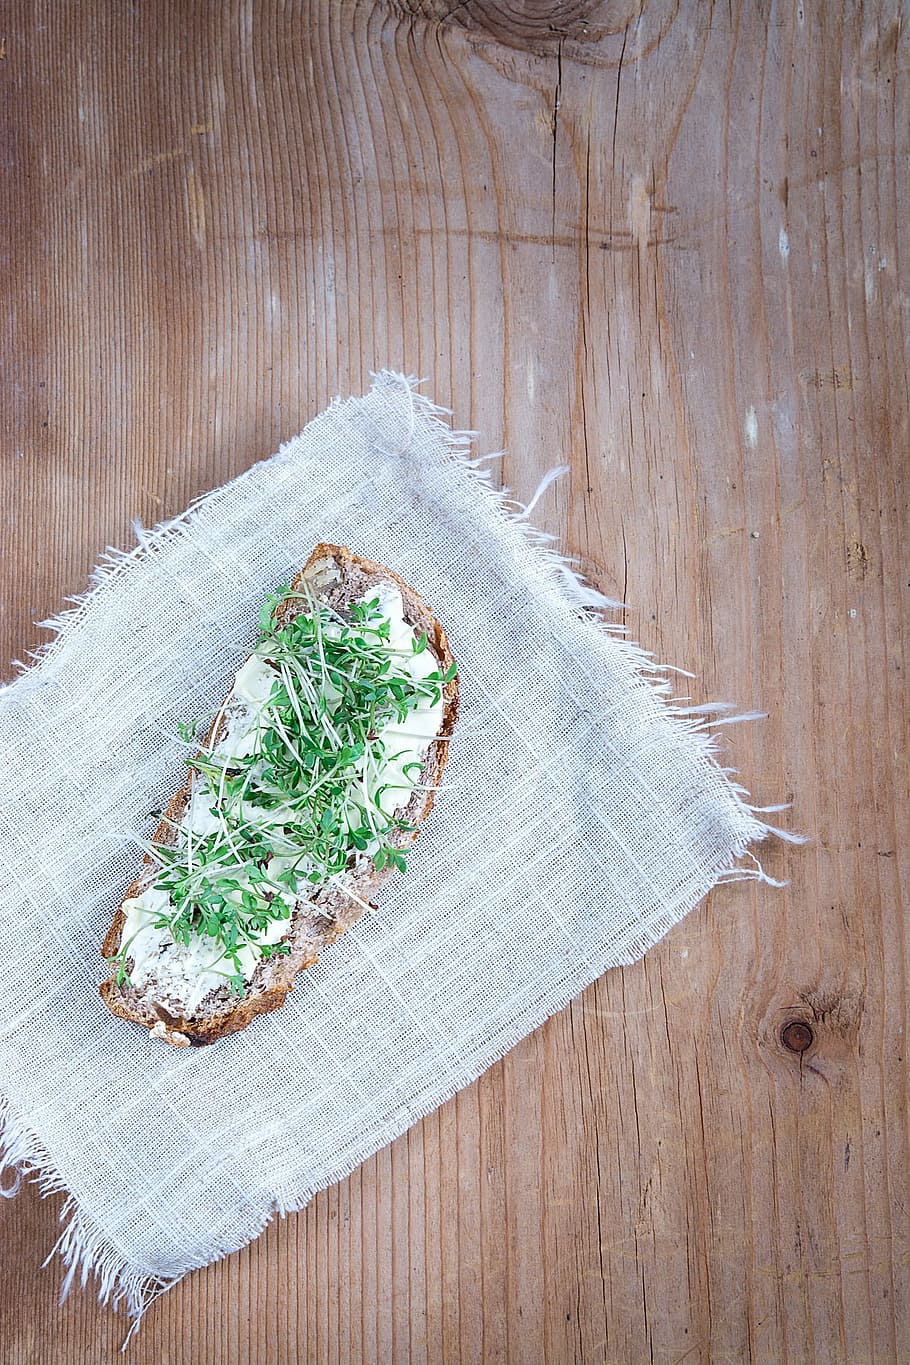 bread, bread and butter, cress, cress bread, sandwich, bread covering, wood, eat, food, close